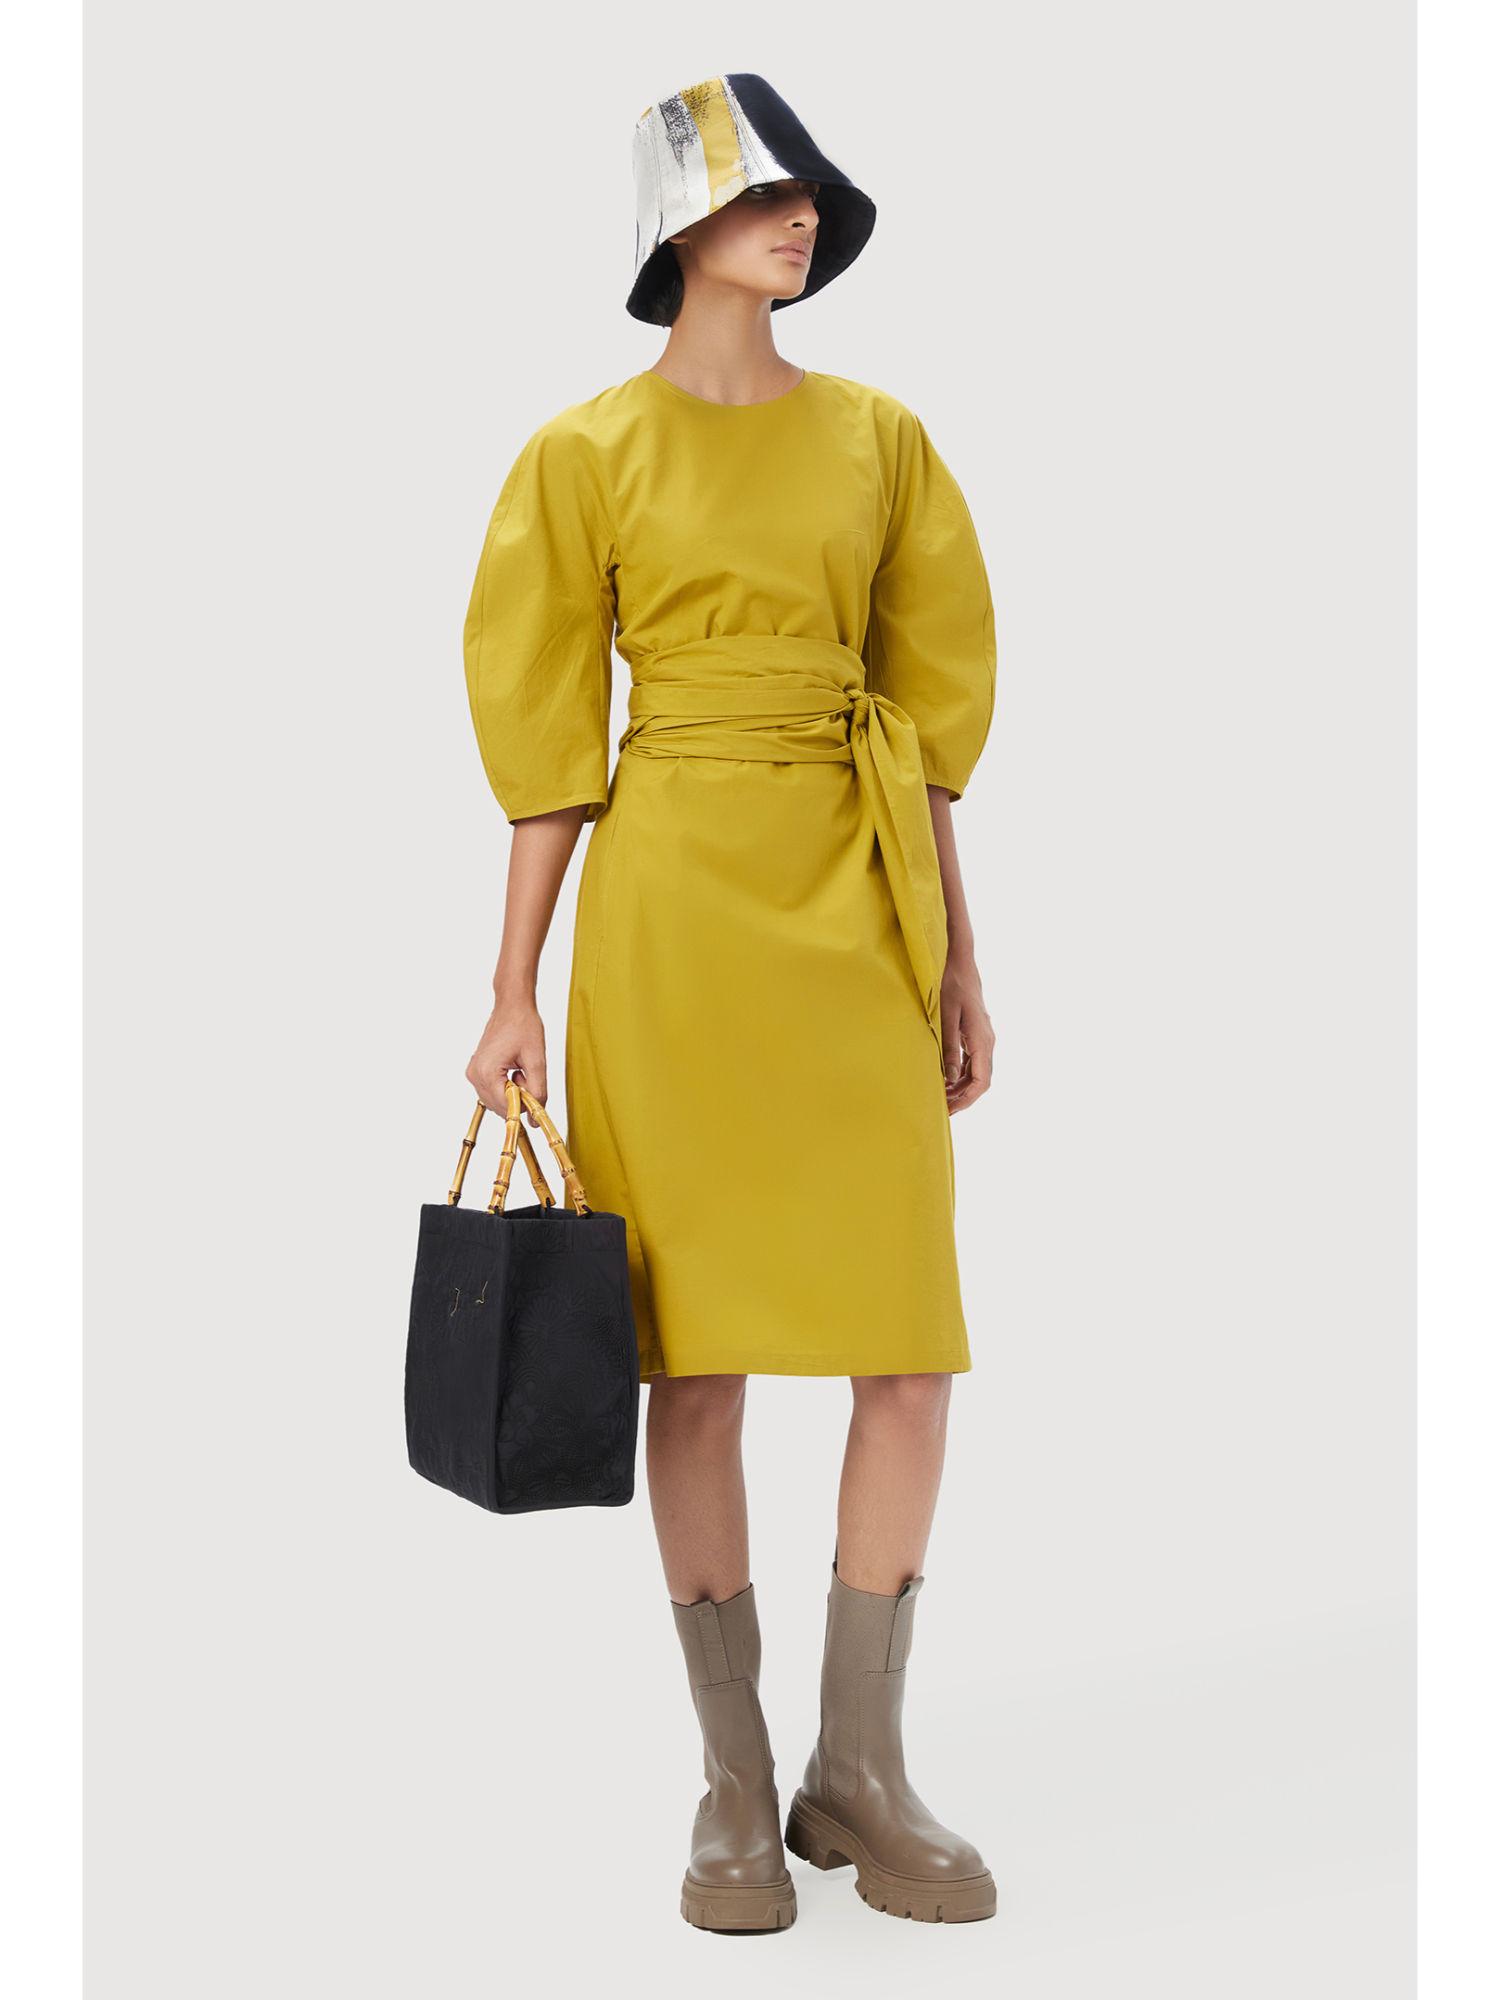 slim-fit-round-neck-dress-with-soft-rounded-shoulders-mustard